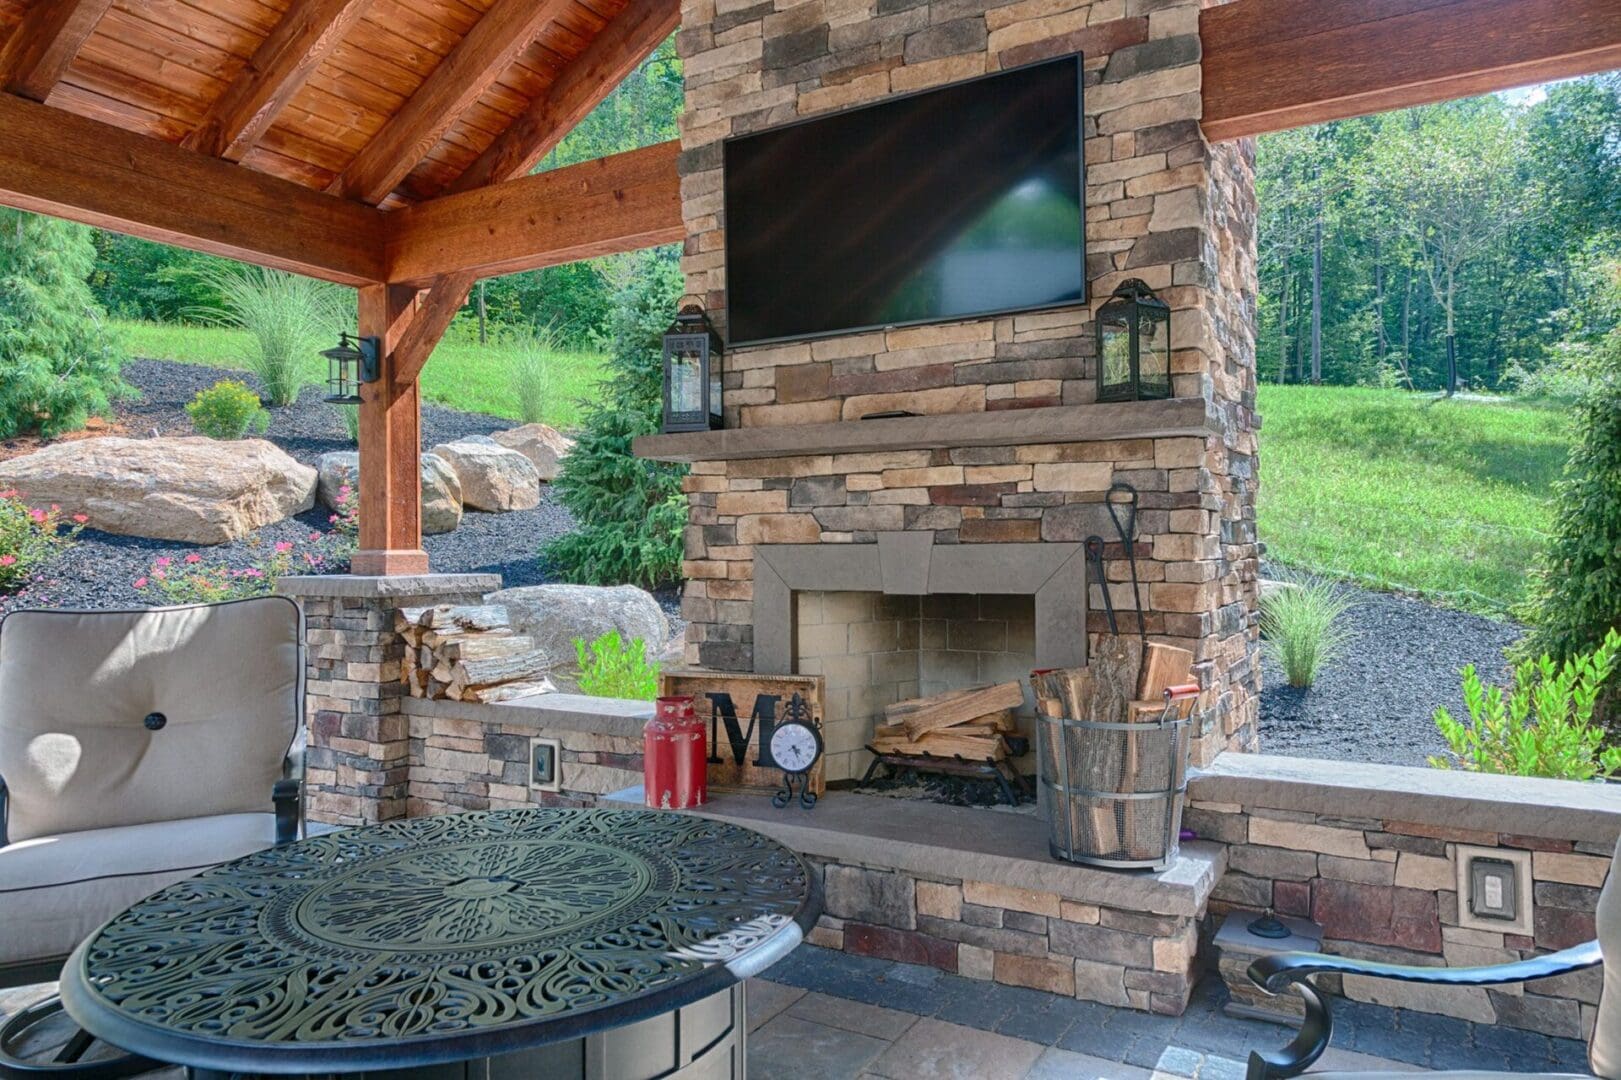 A covered patio with a stone fireplace and tv, providing cozy outdoor services.